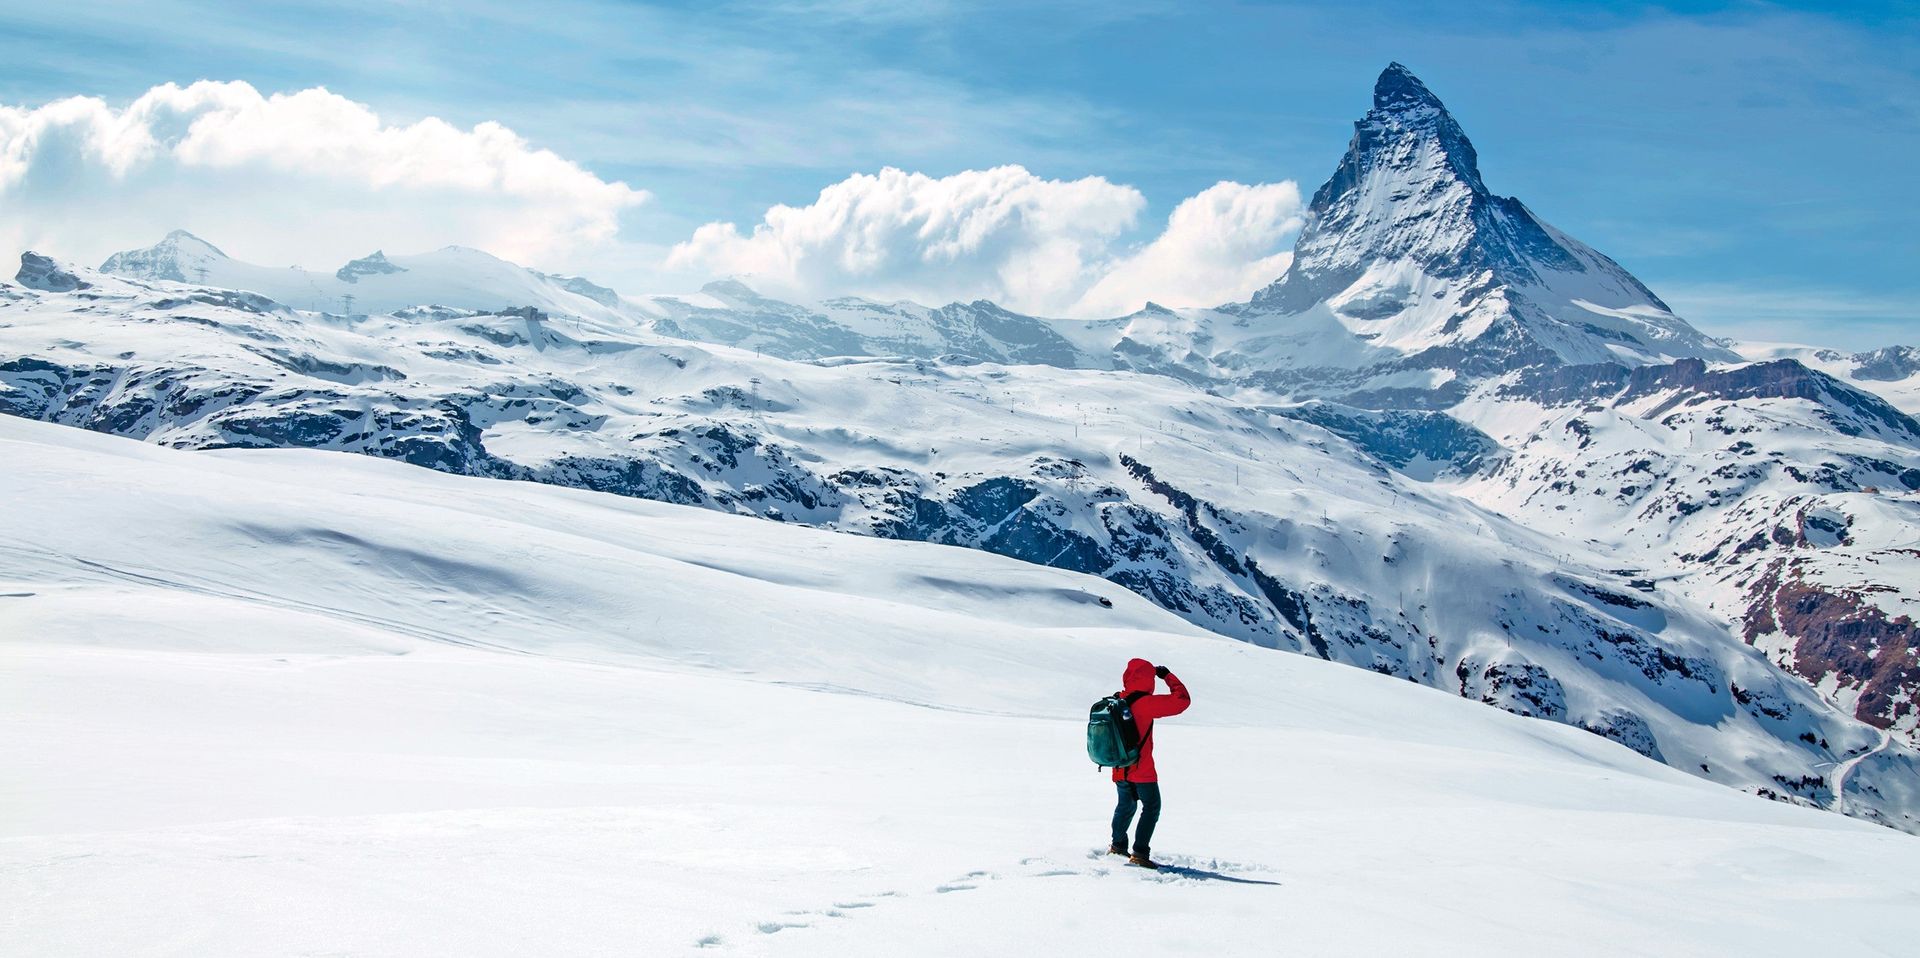 A person exploring the snowy mountains in Switzerland